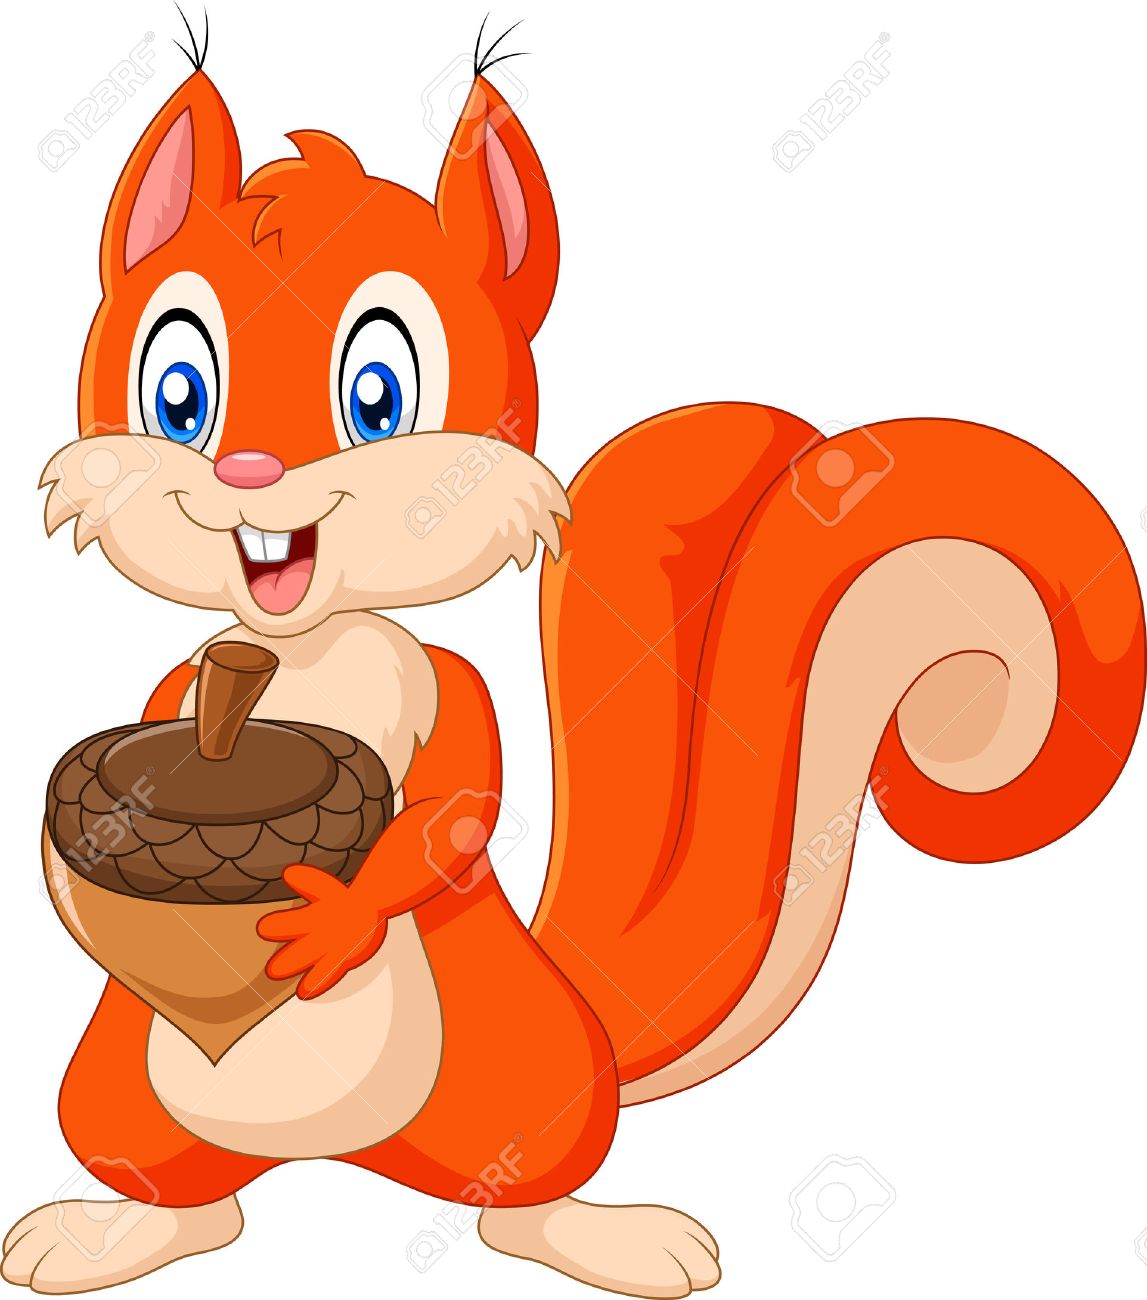 Cartoon Squirrel Pictures | Free download on ClipArtMag